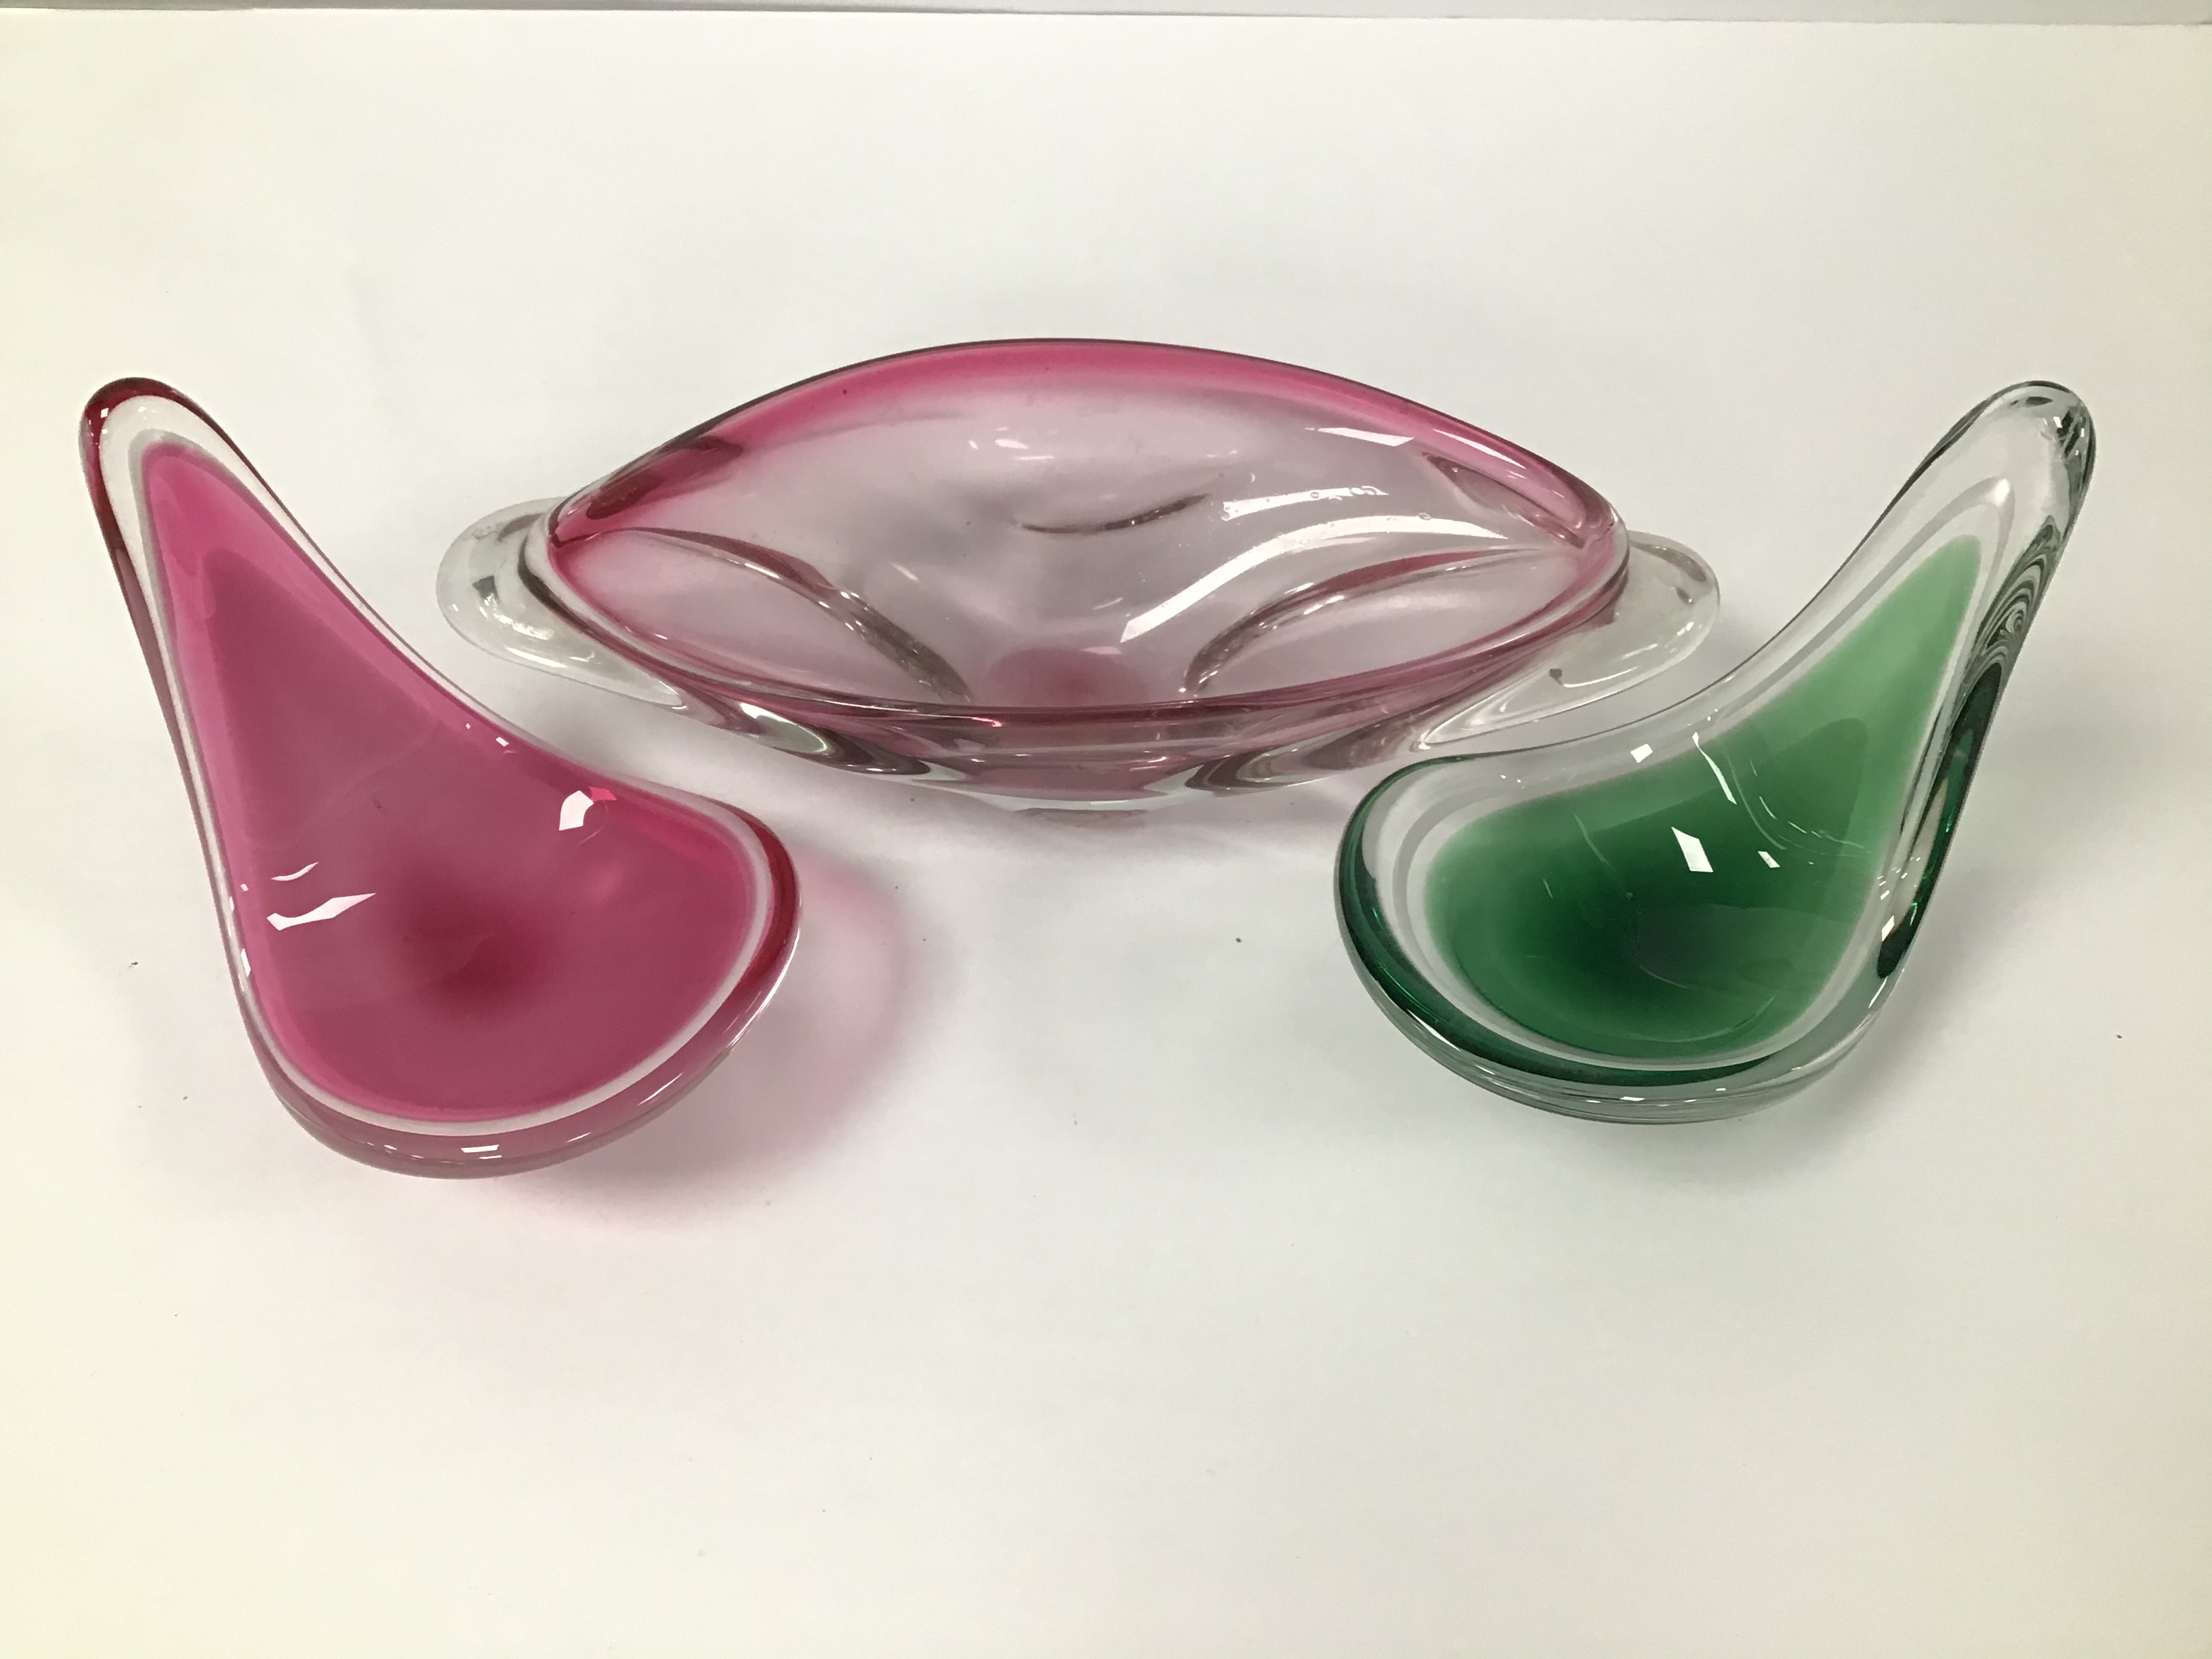 A PAIR OF SWEDISH FLYGSFORS COQUILLE PINK ART GLASS DISHES, BOTH SIGNED TO THEIR BASES, 12CM HIGH,